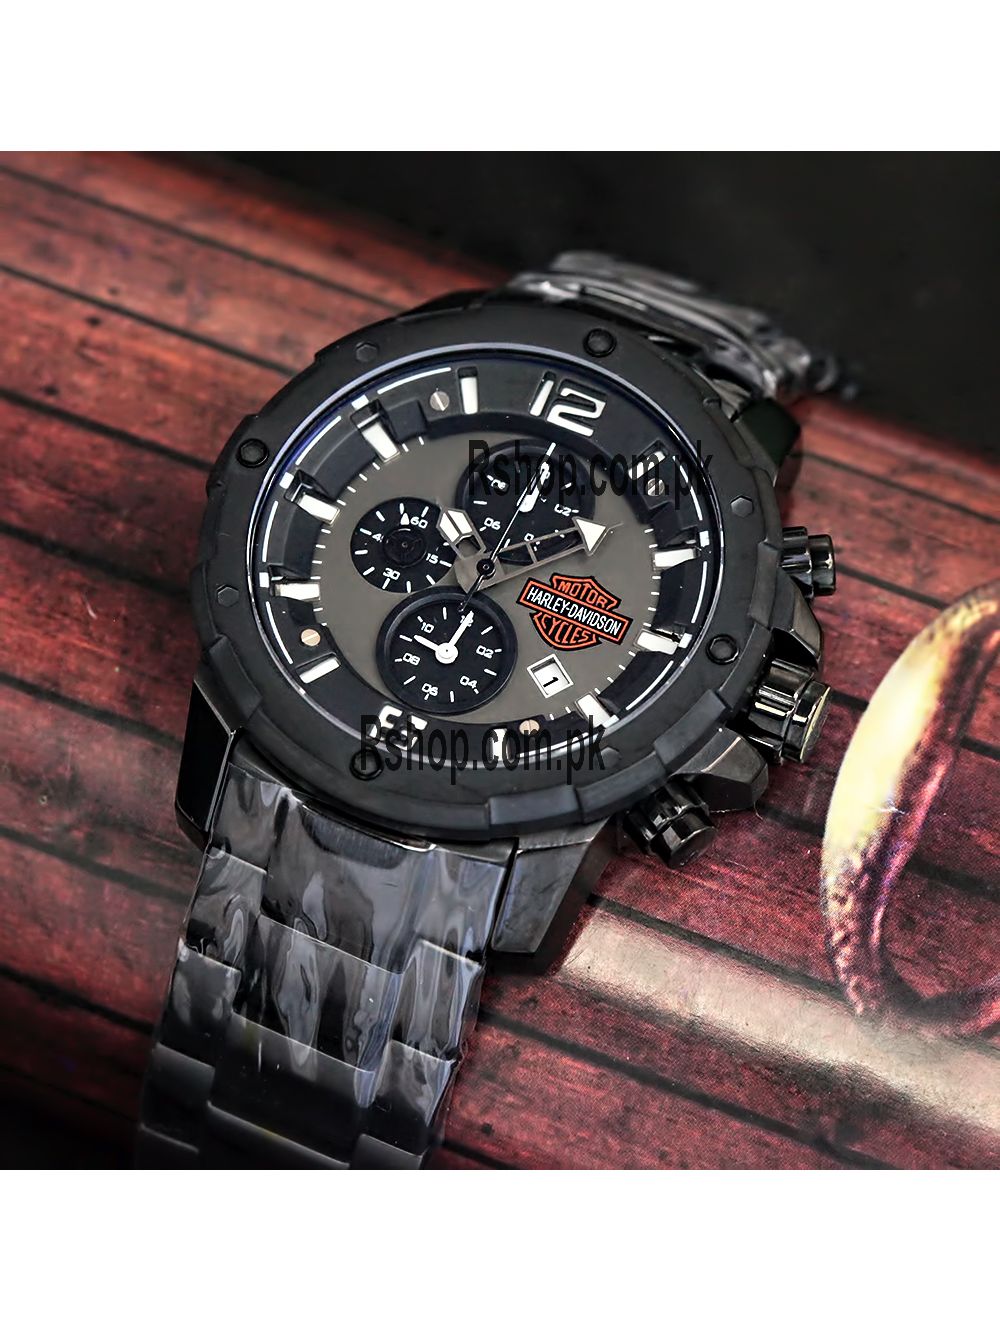 Harley Davidson Chronograph Watches In Pakistan Harley Davidson Chronograph Watch Price In Pakistan